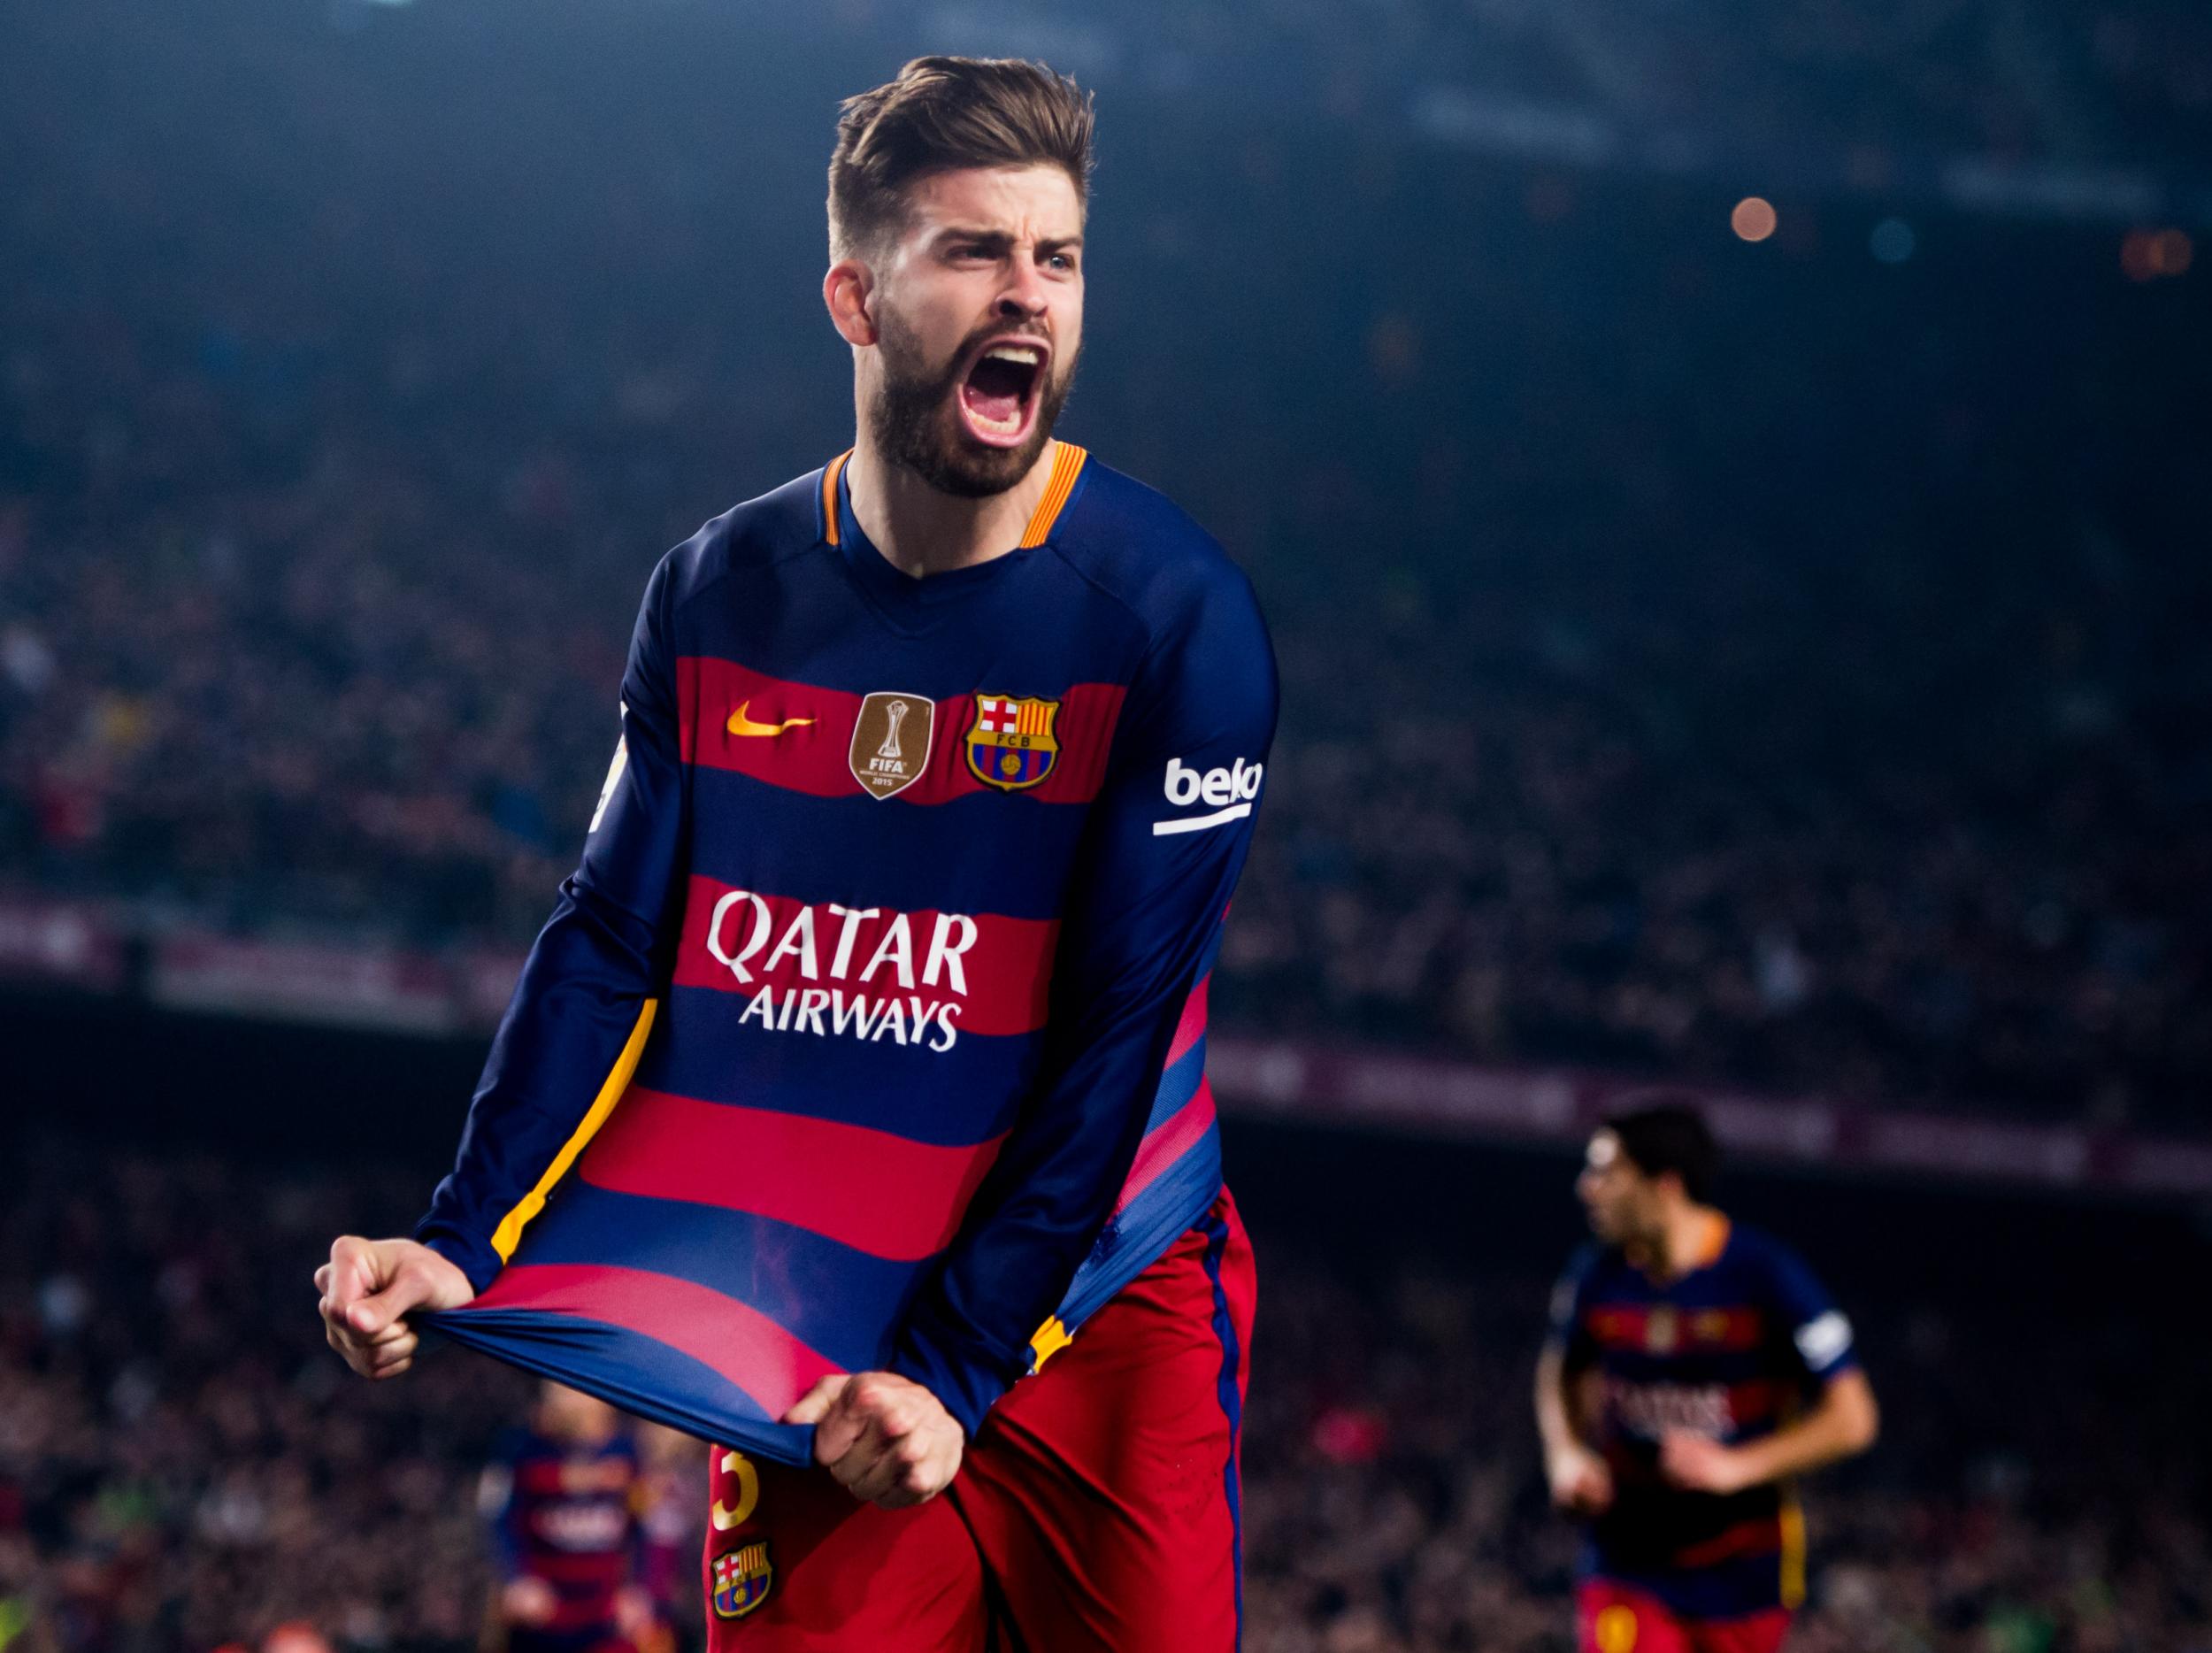 Pique looked set to be involved in smoothing over tension (Getty)